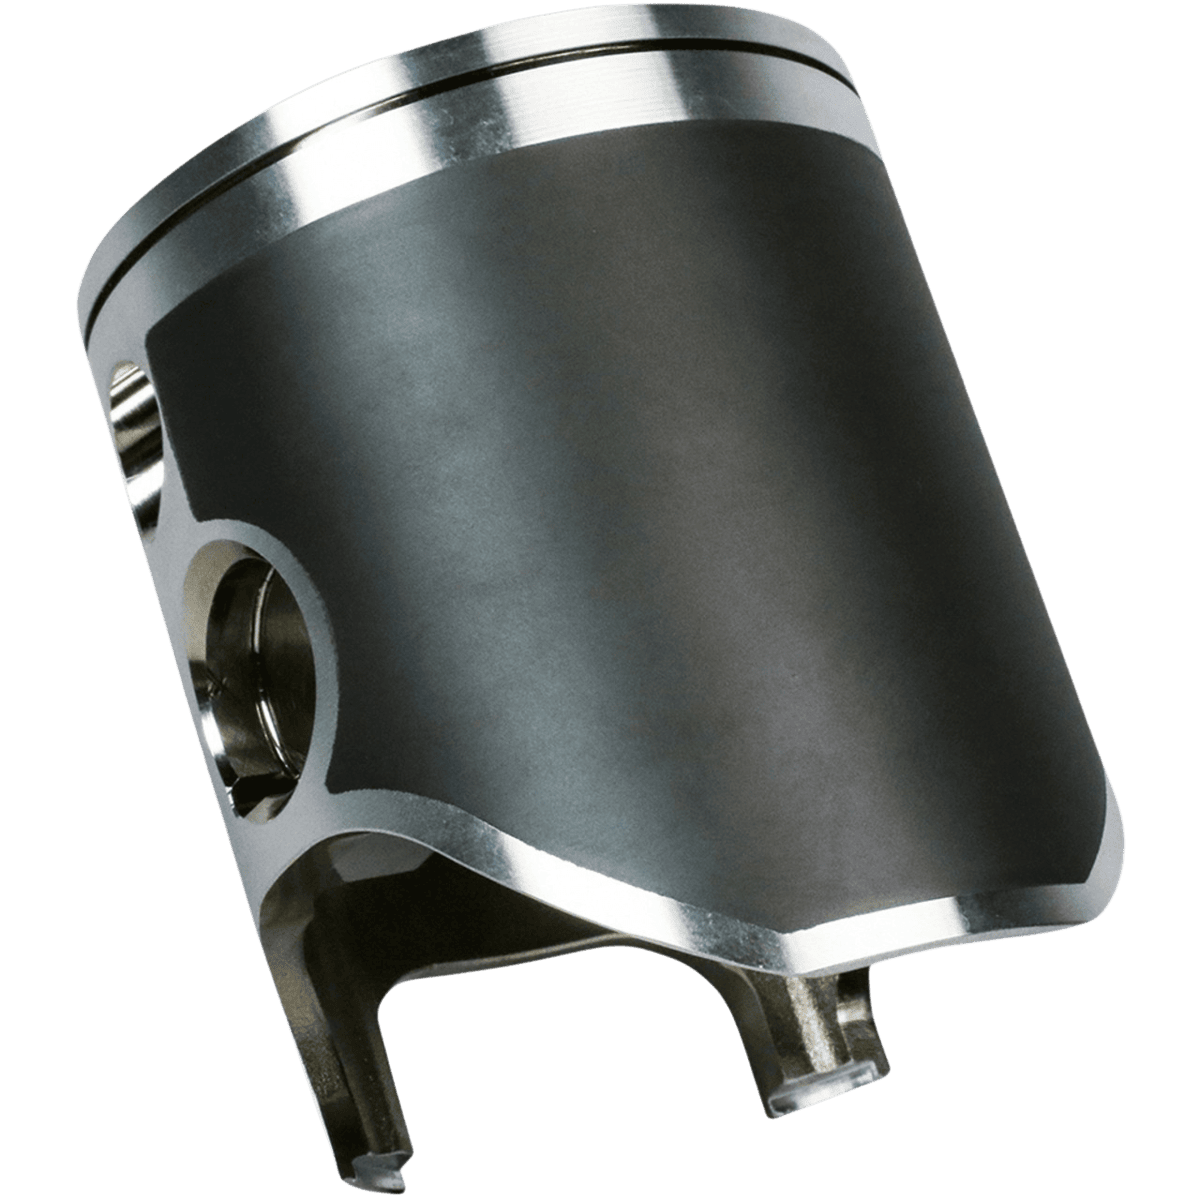 Best 2007 WR125 Piston Kit for Two strokes